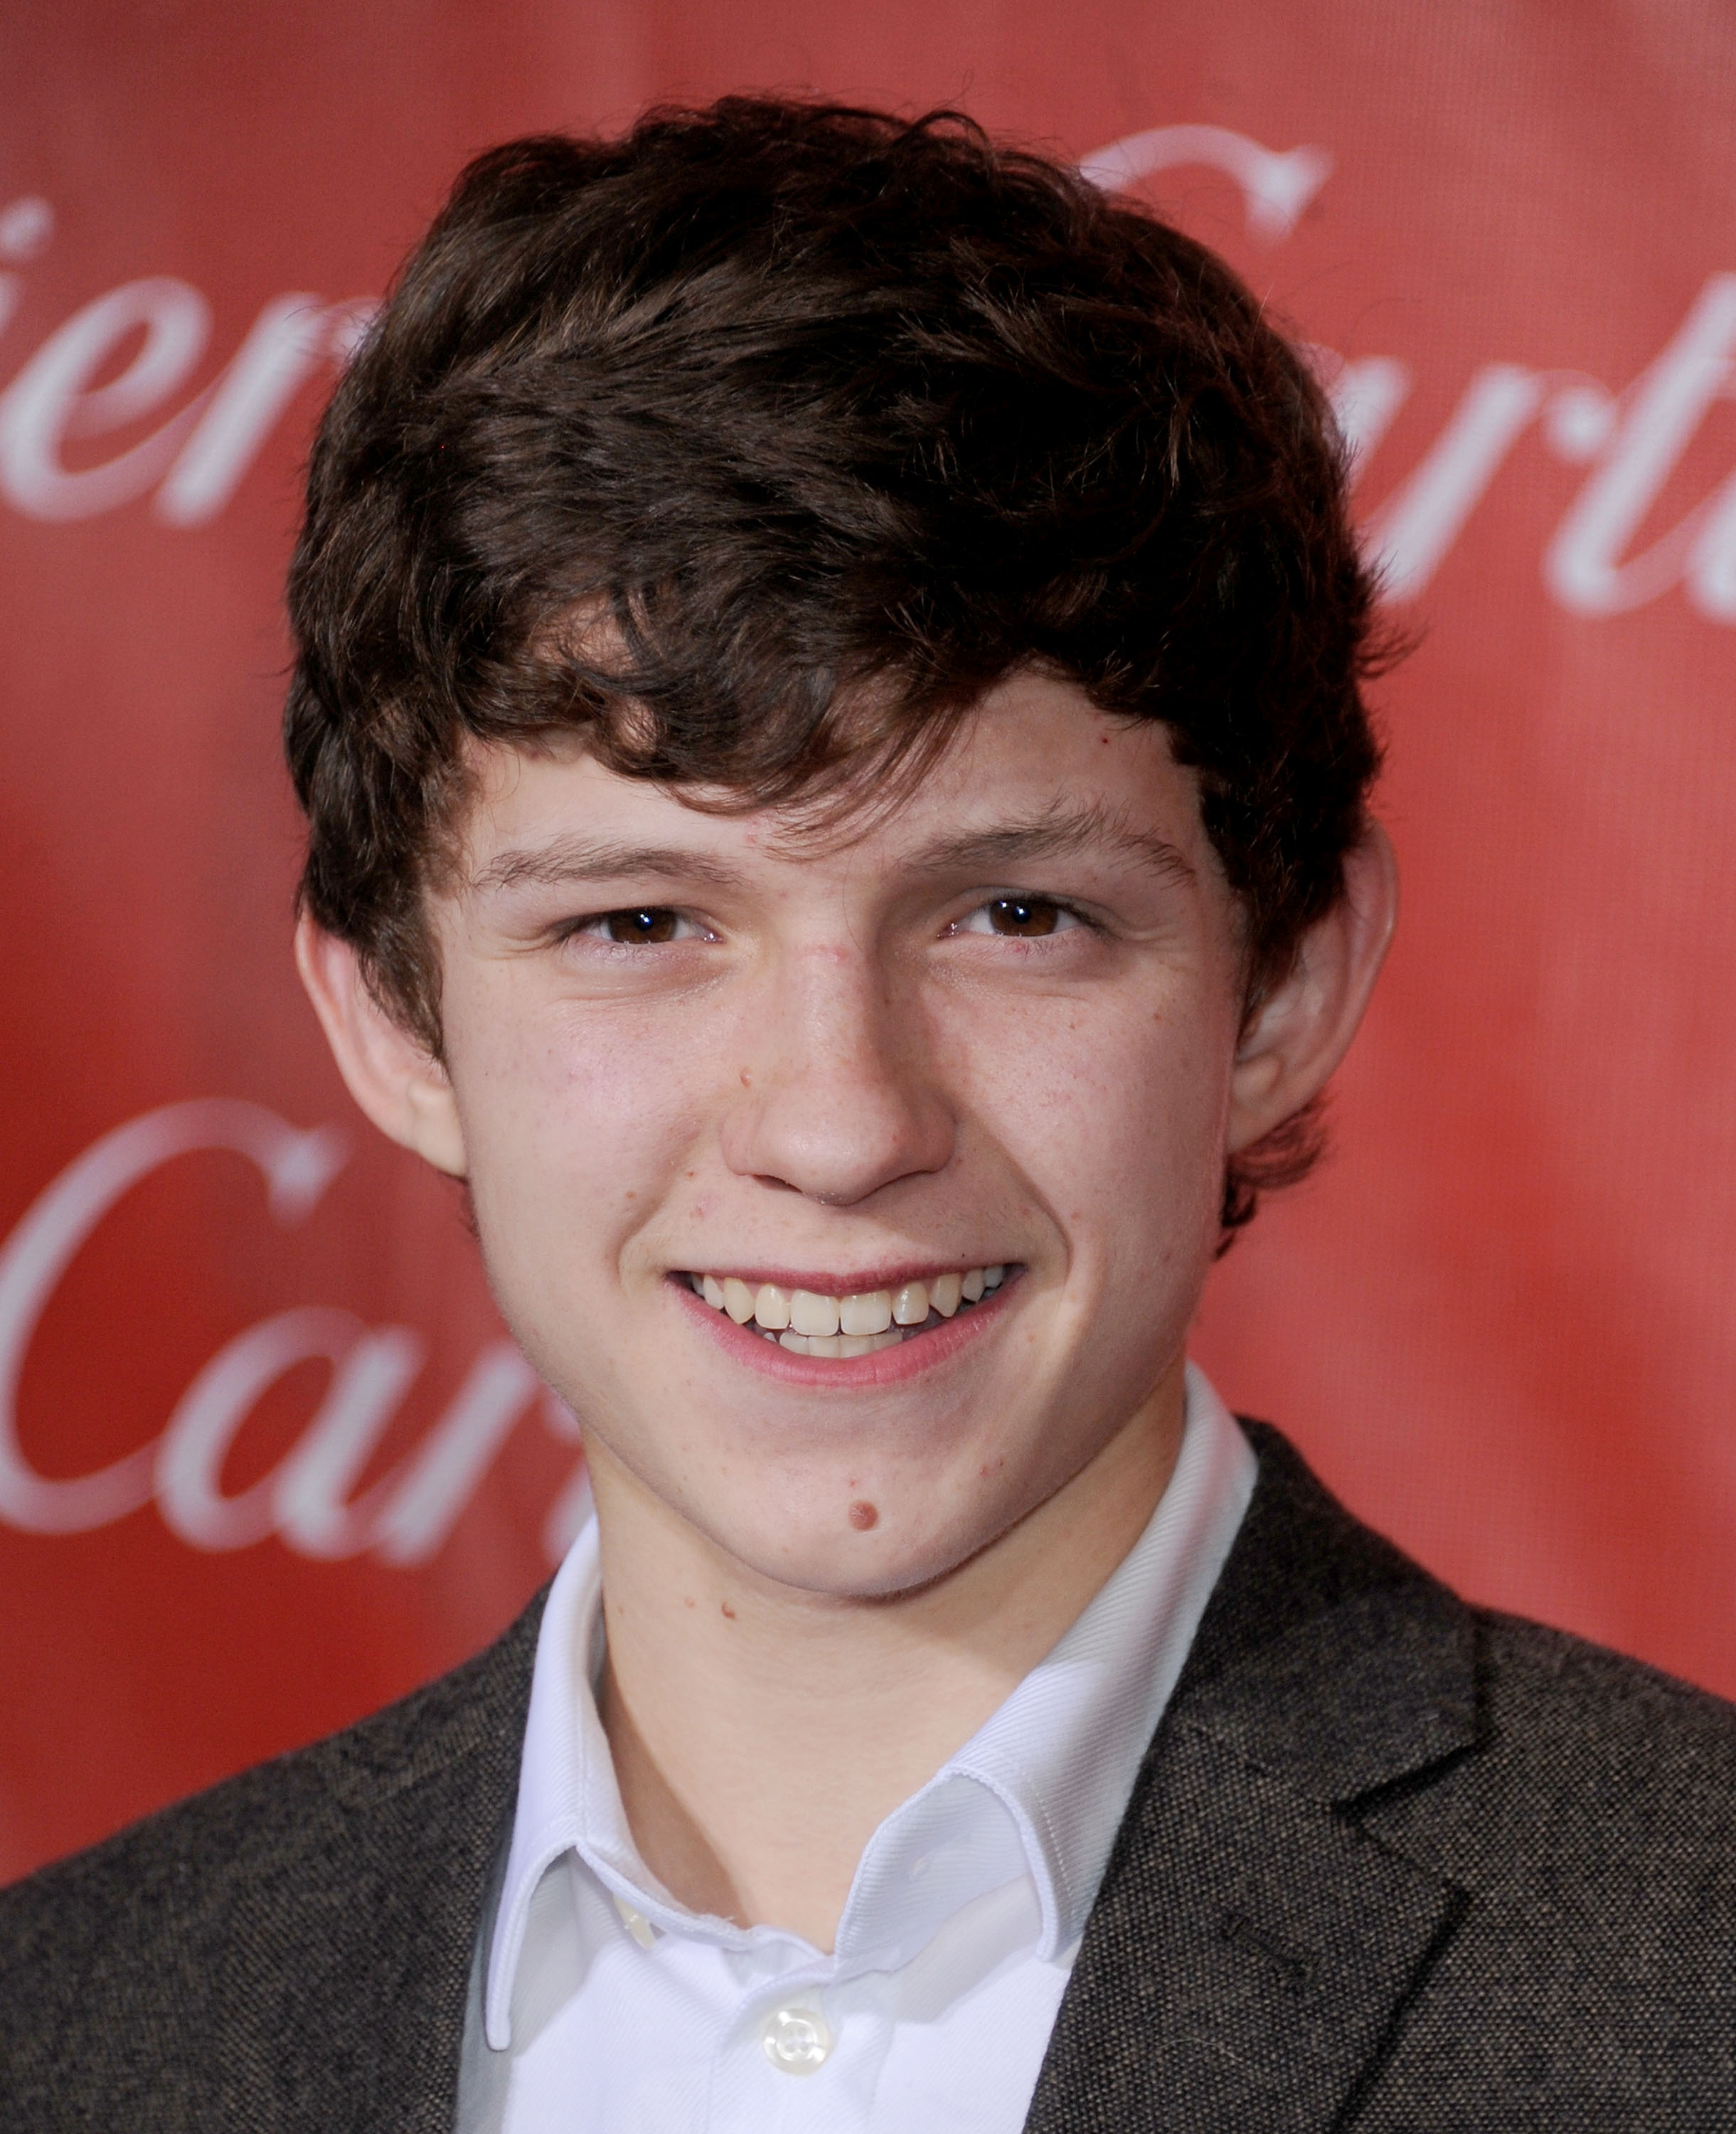 Tom Holland arrives at the 24th Annual Palm Springs International Film Festival Awards Gala at Palm Springs Convention Center on January 5, 2013, in Palm Springs, California | Source: Getty Images